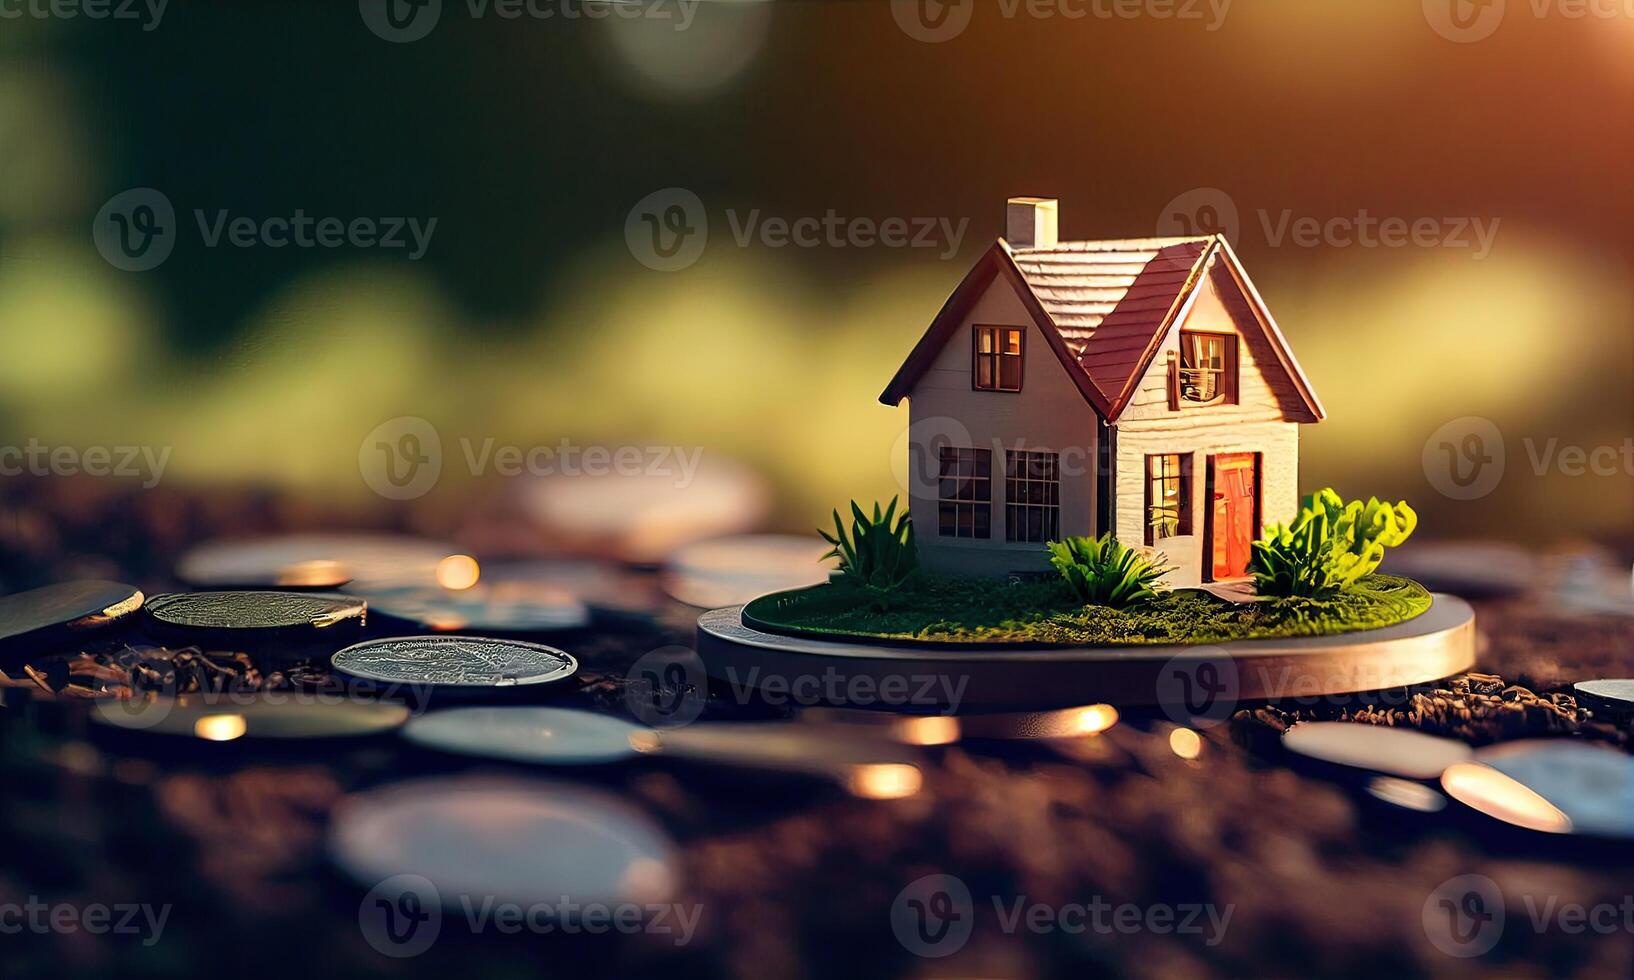 Mini house on a stack of coins. Concept of Investment property. Miniature house on stack coins using as property real estate and business financial concept. photo